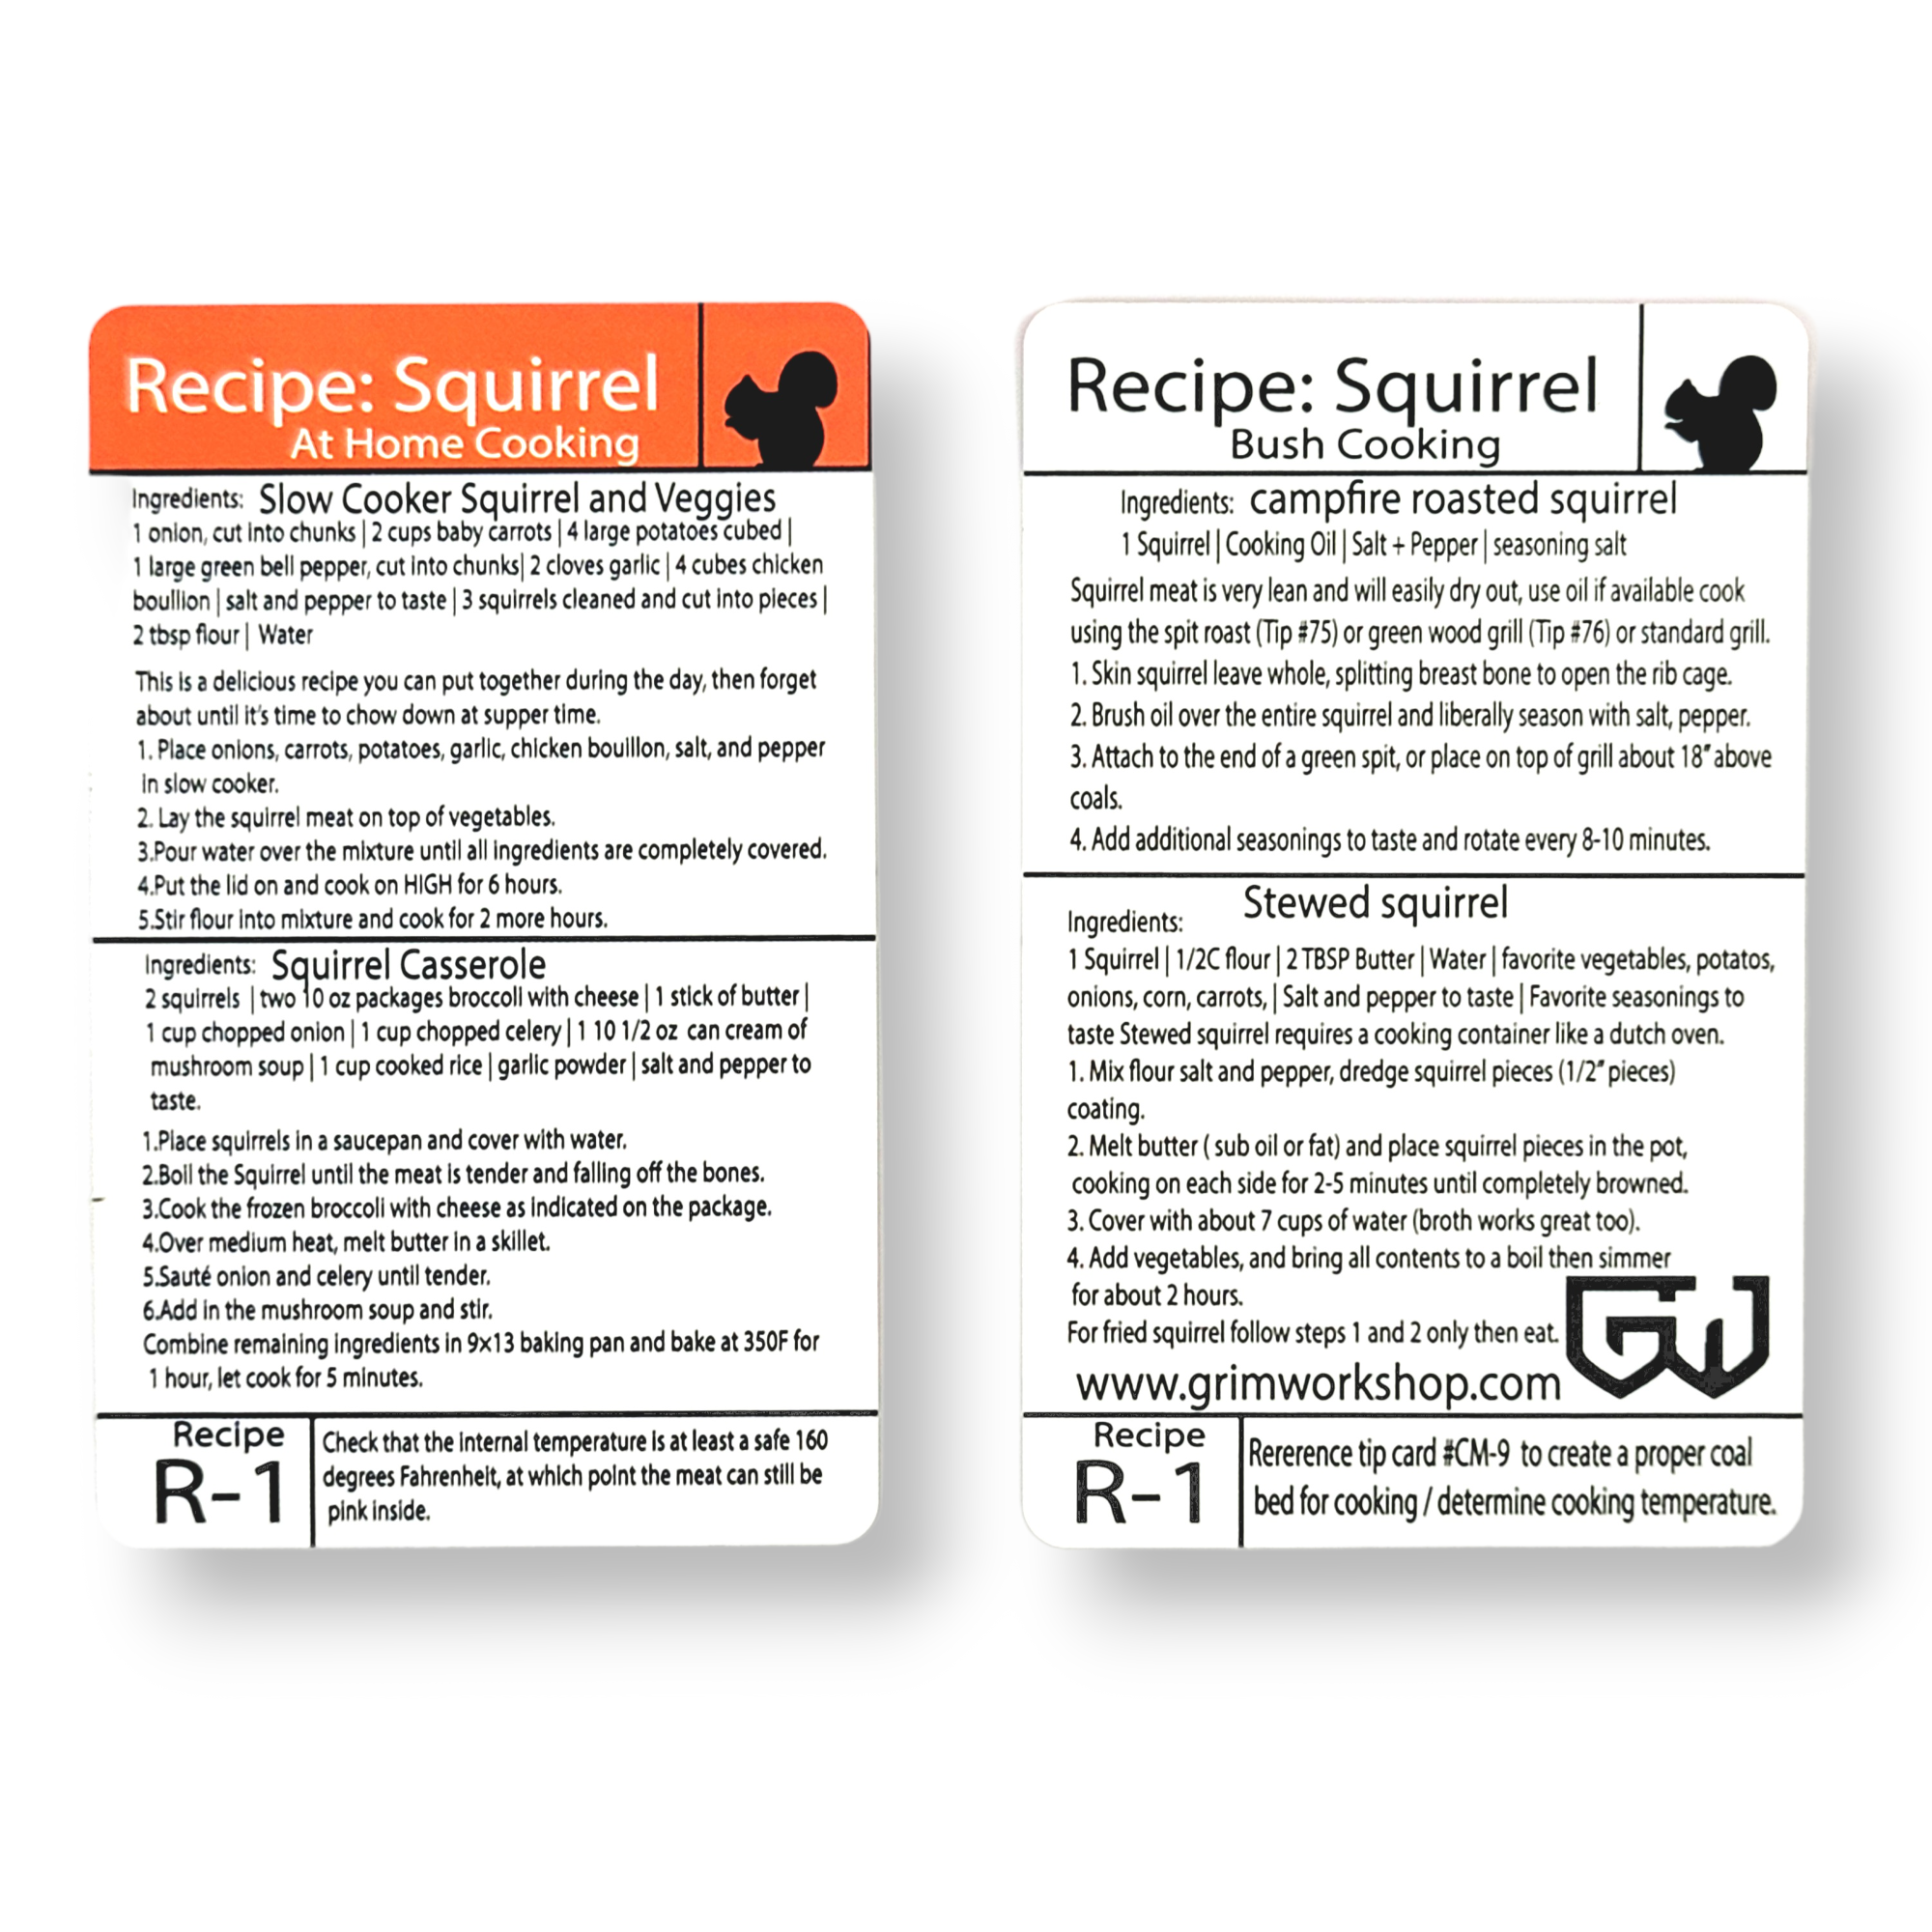 How to Cook Squirrel Recipies Tip Card R-1